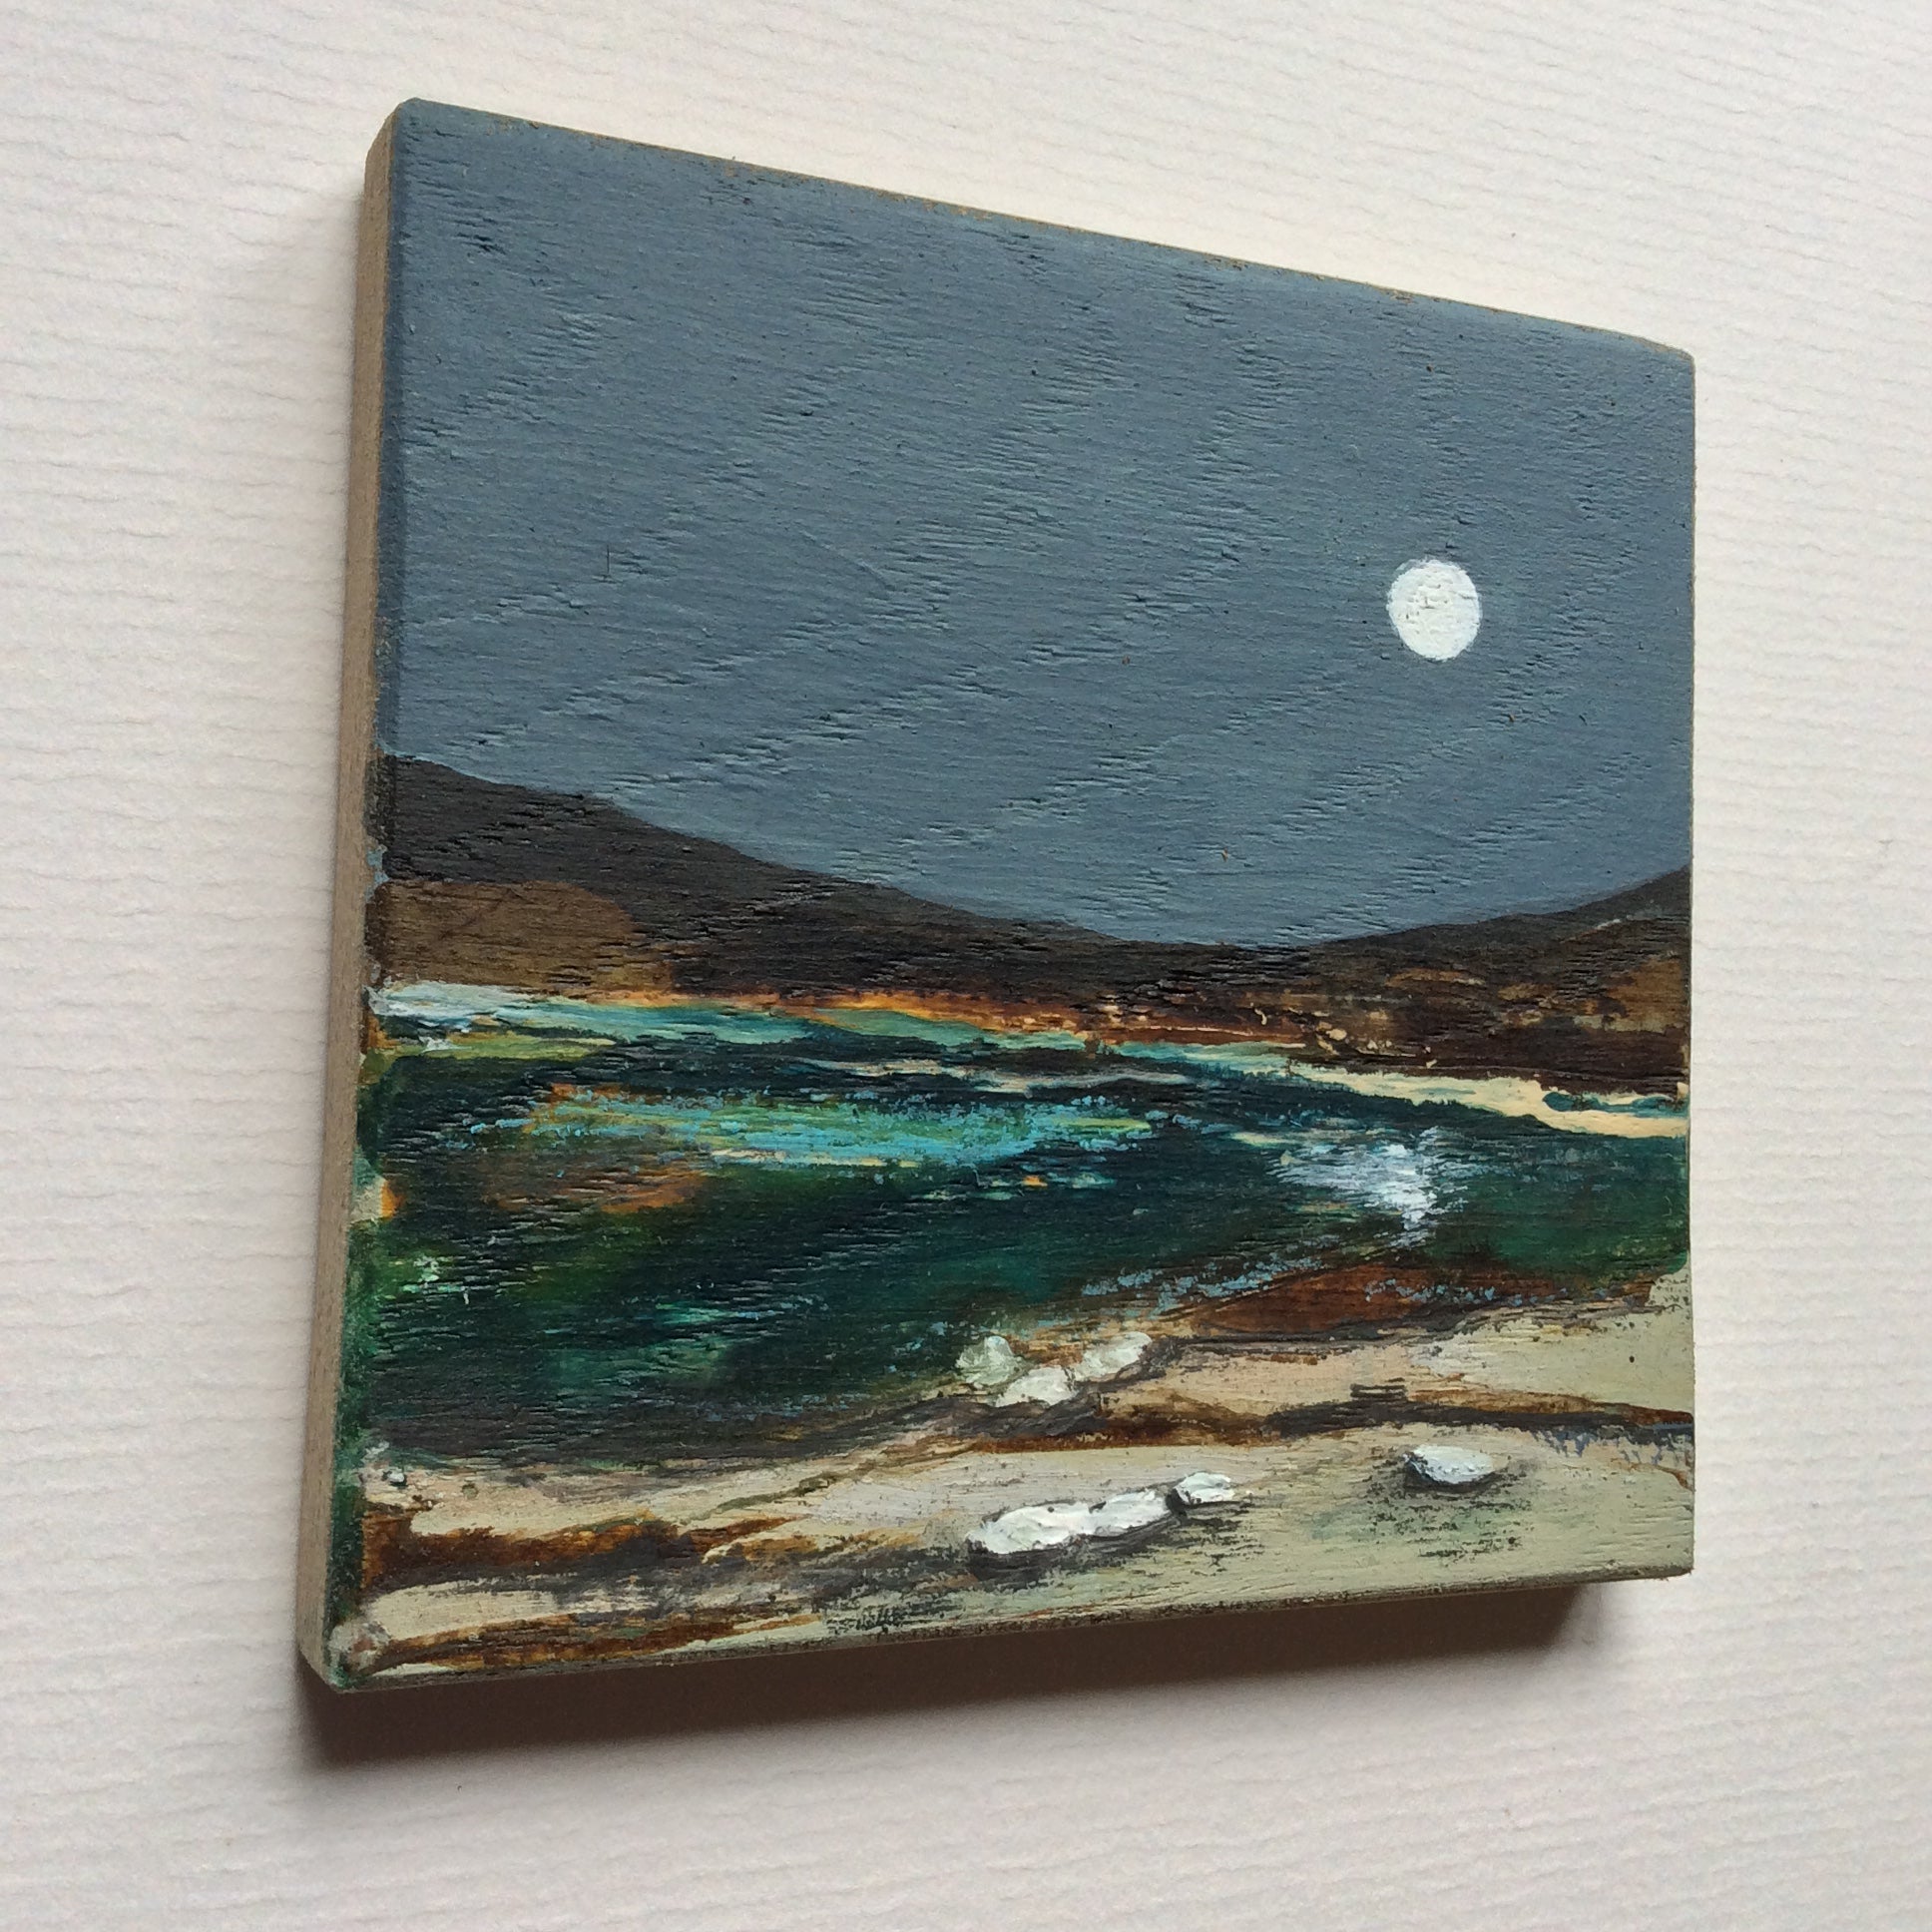 Mixed Media Art on wood By Louise O'Hara - "Dreaming of a shoreline”